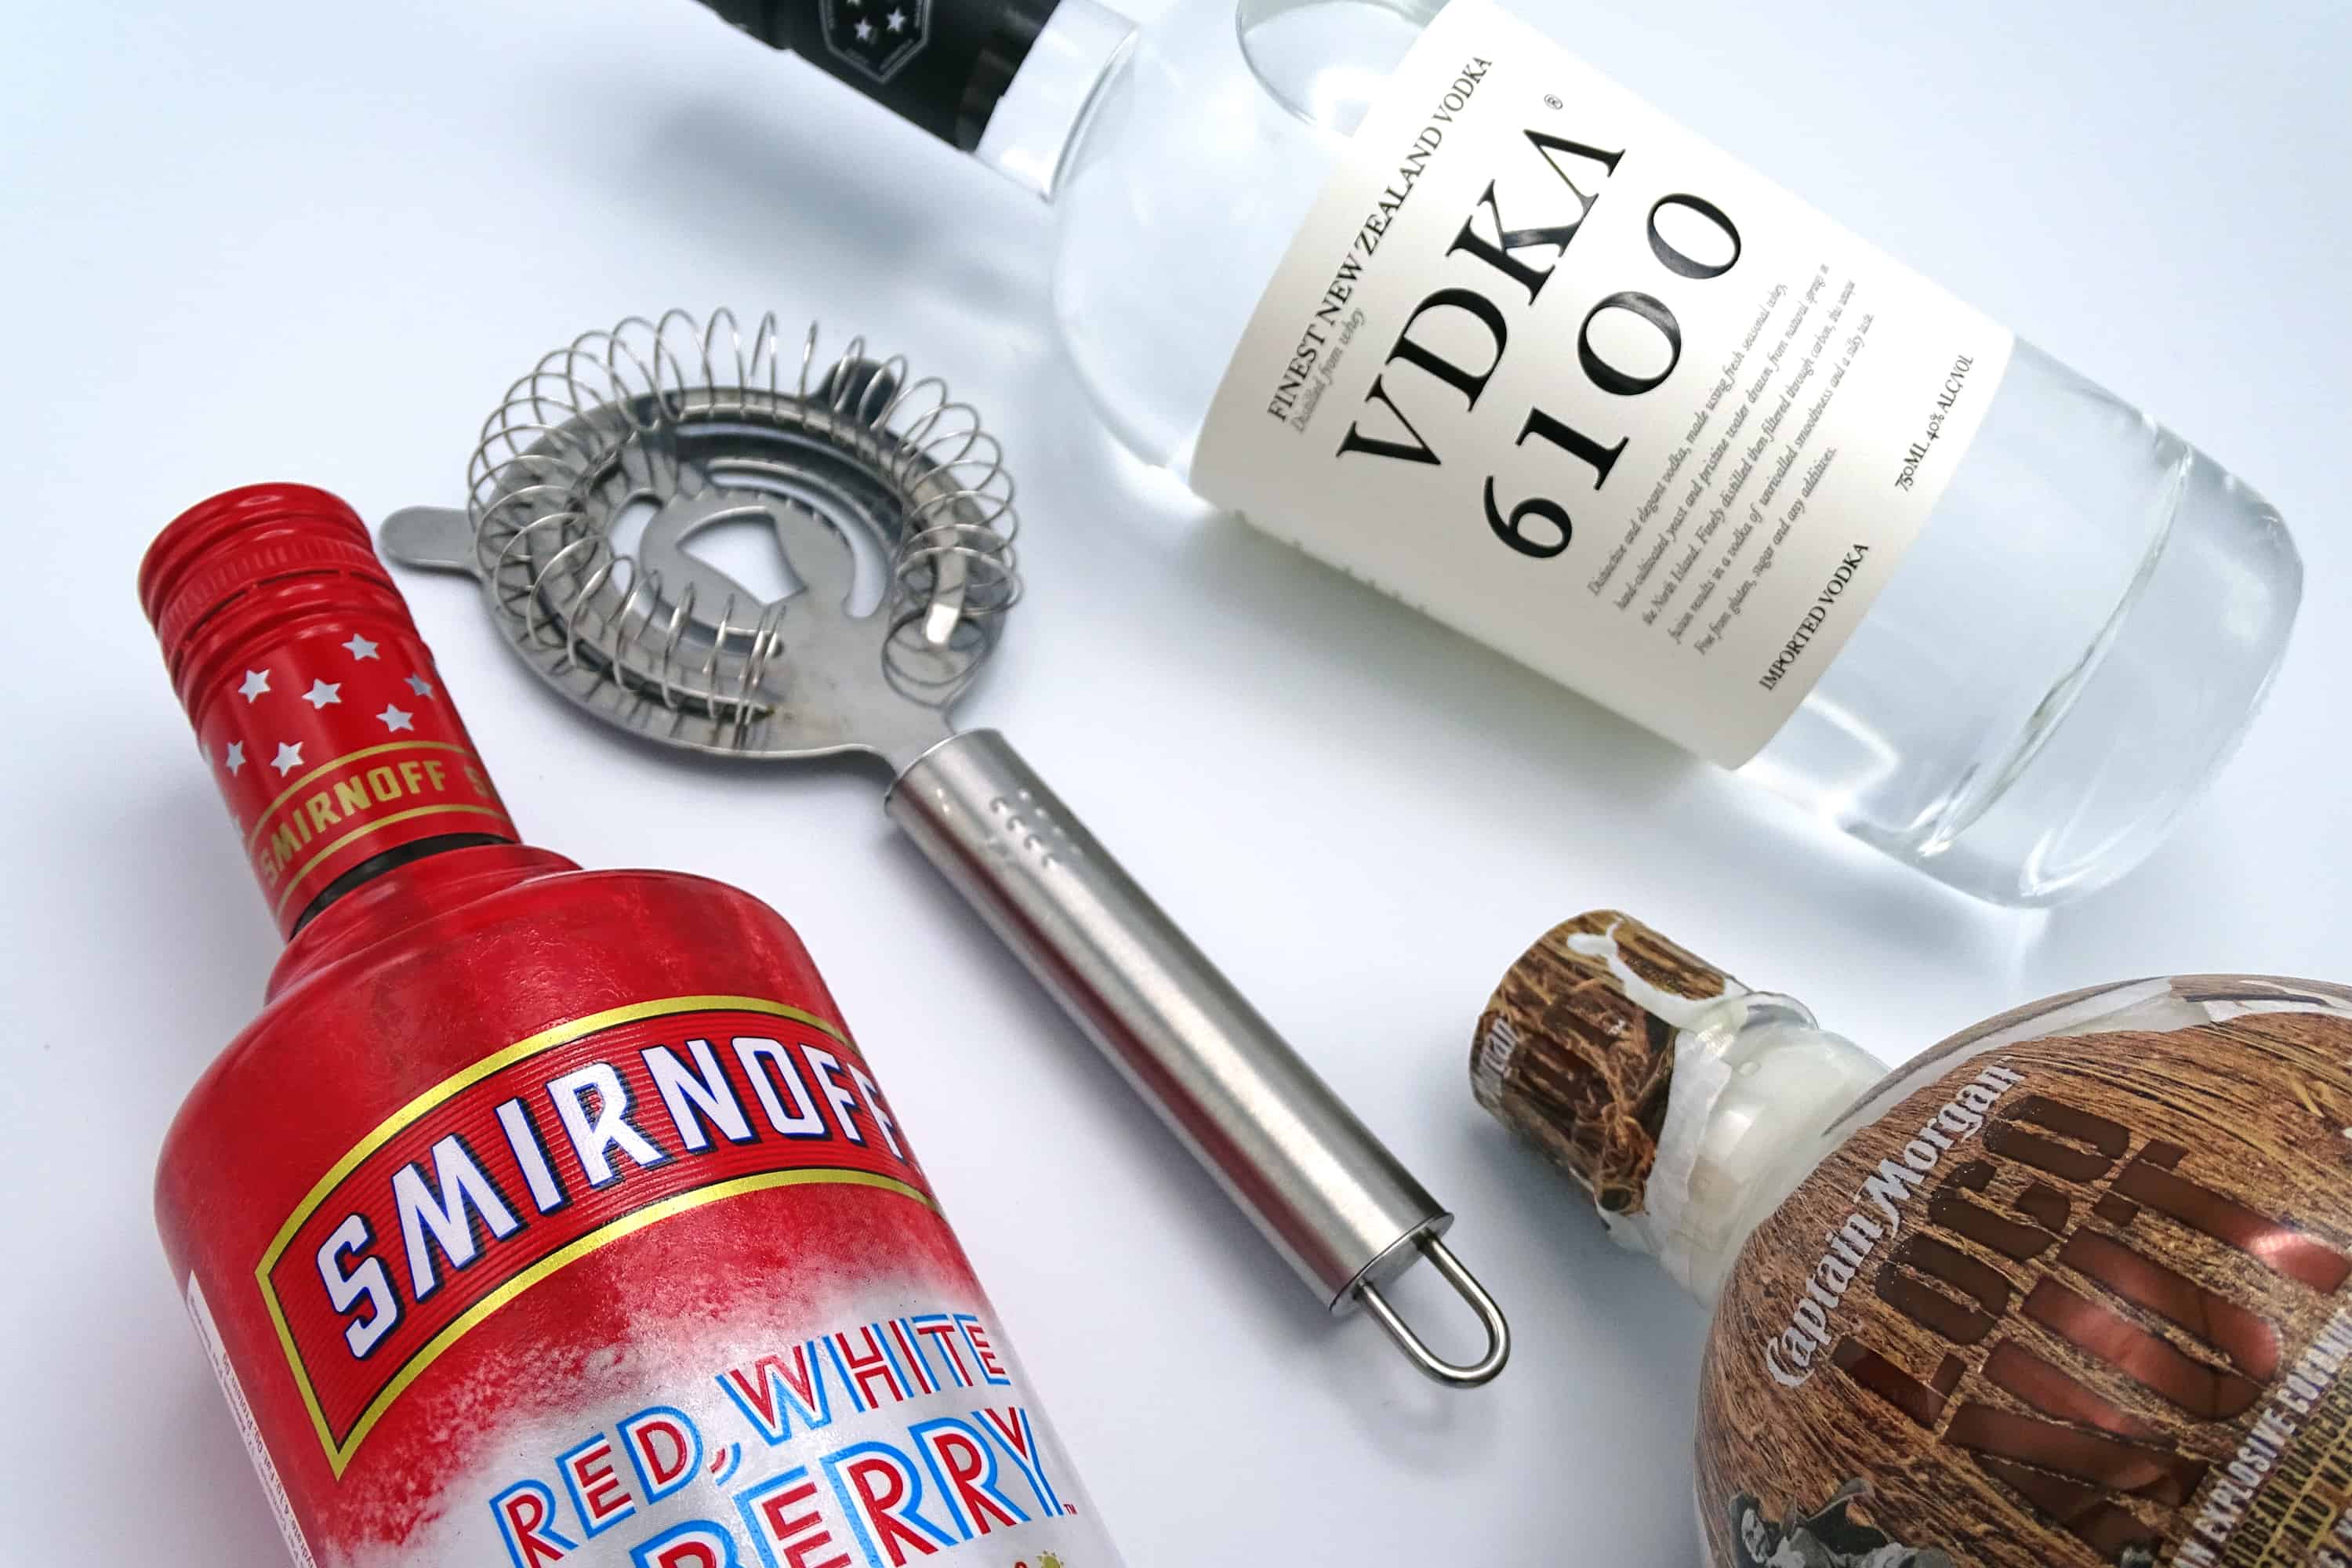 Best cocktails to celebrate 4th of July including: Smirnoff Red, White, and Berry bottle. Cocktail strainer. VDKA 6100 bottle. Captain Morgan Loco Nut bottle. 